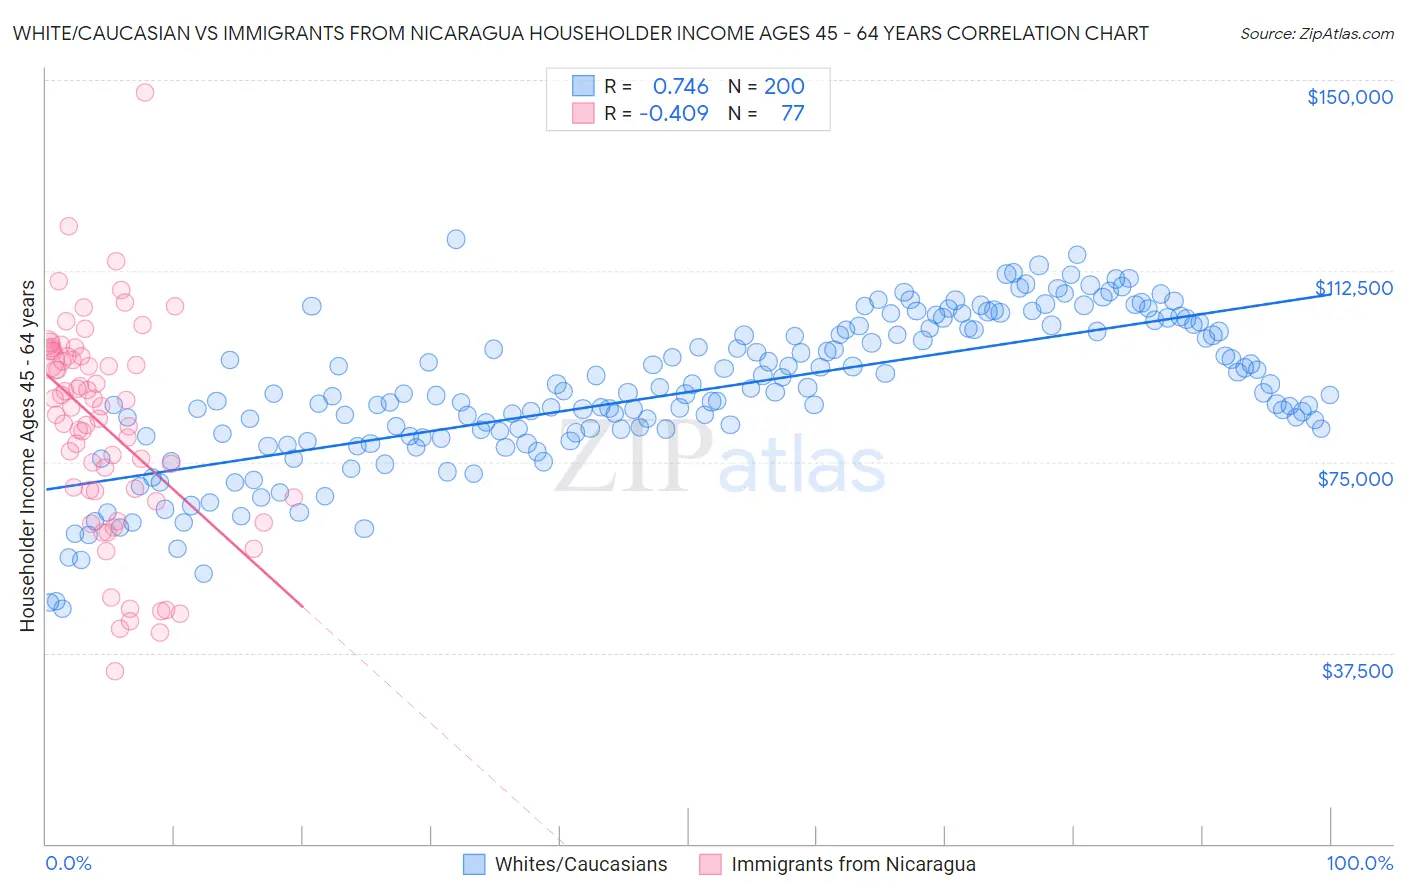 White/Caucasian vs Immigrants from Nicaragua Householder Income Ages 45 - 64 years